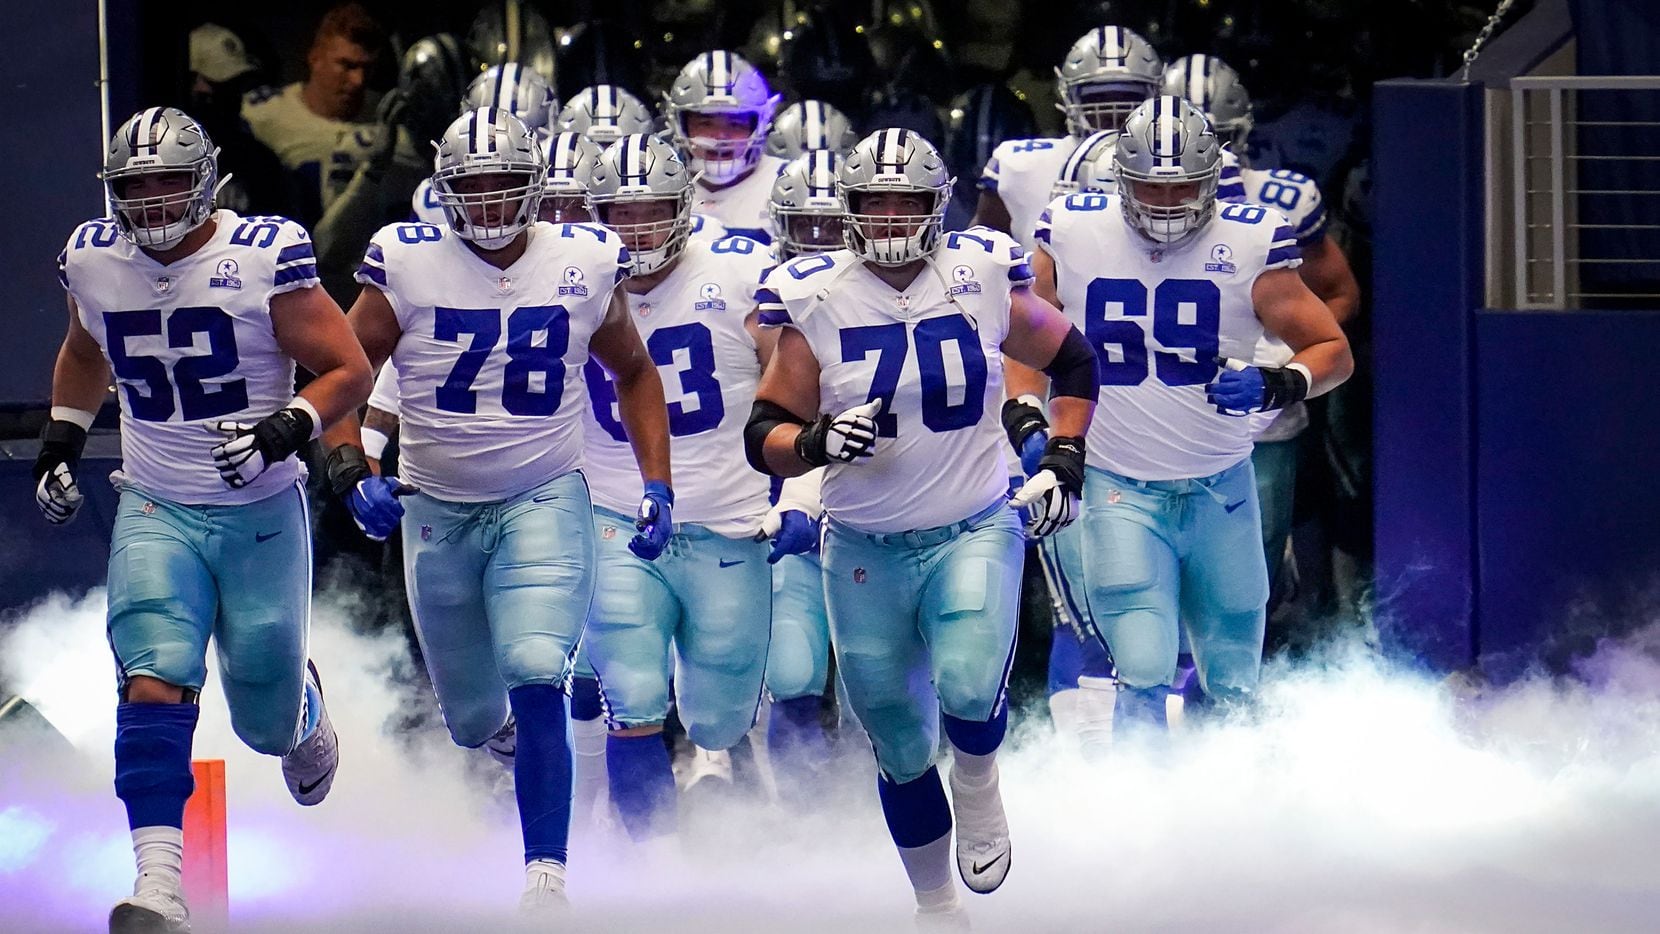 Dallas Cowboys offensive guard Zack Martin (70) leads the team onto the field to face the New York Giants in an NFL football game at AT&T Stadium on Sunday, Oct. 11, 2020, in Arlington. (Smiley N. Pool/The Dallas Morning News)